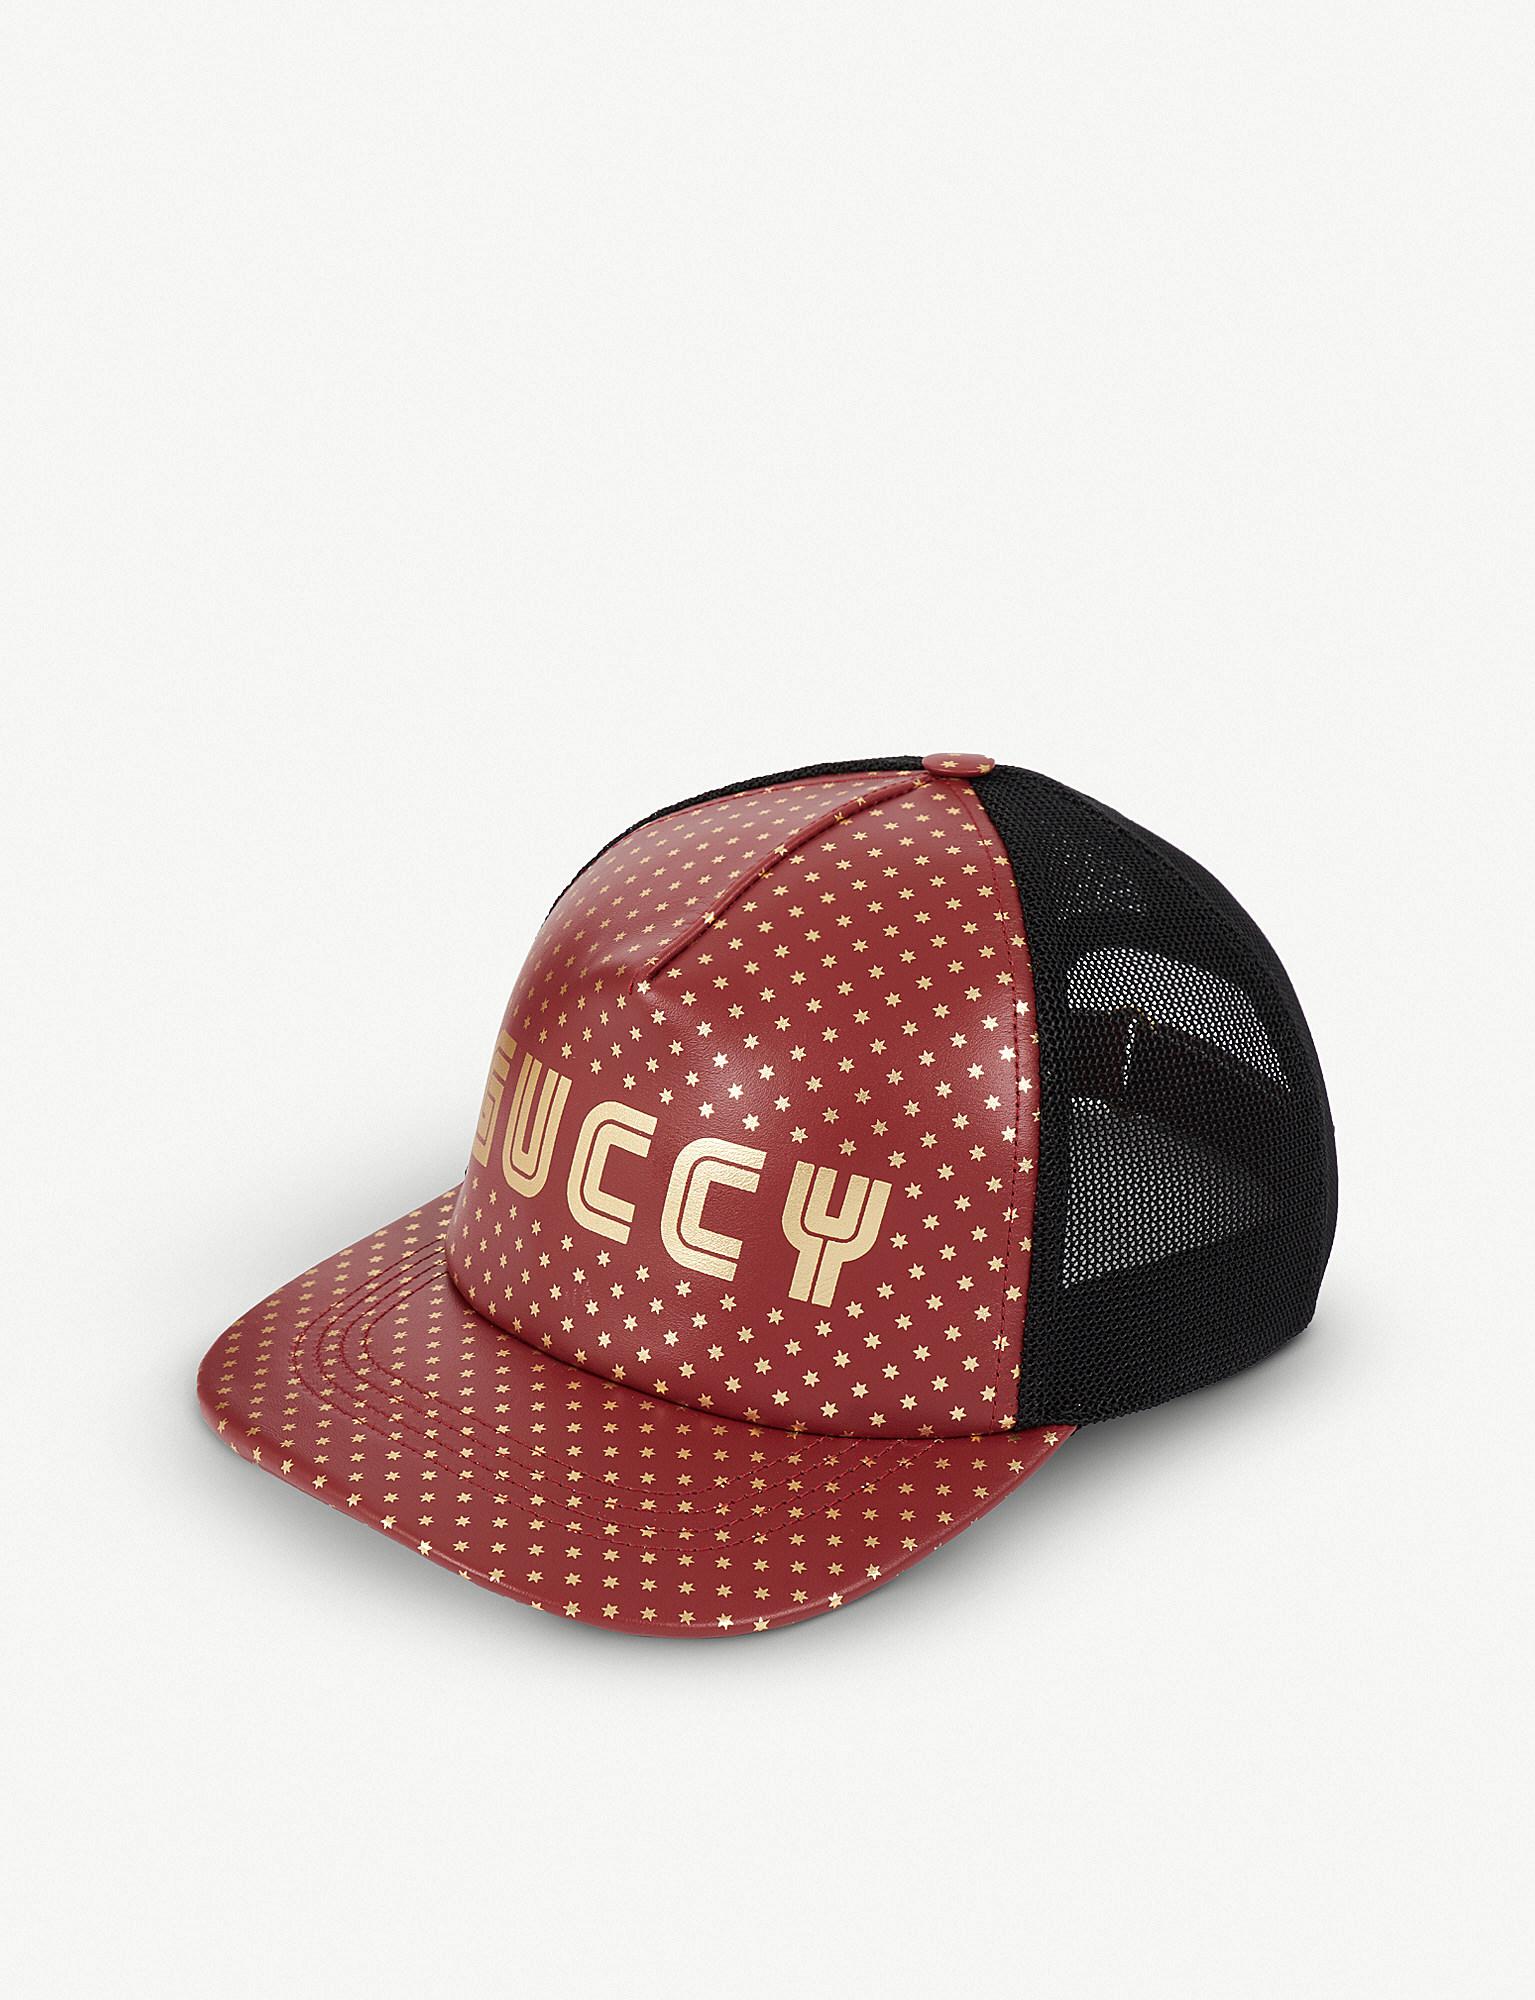 Gucci Guccy Leather Baseball Cap in Red for Men - Lyst